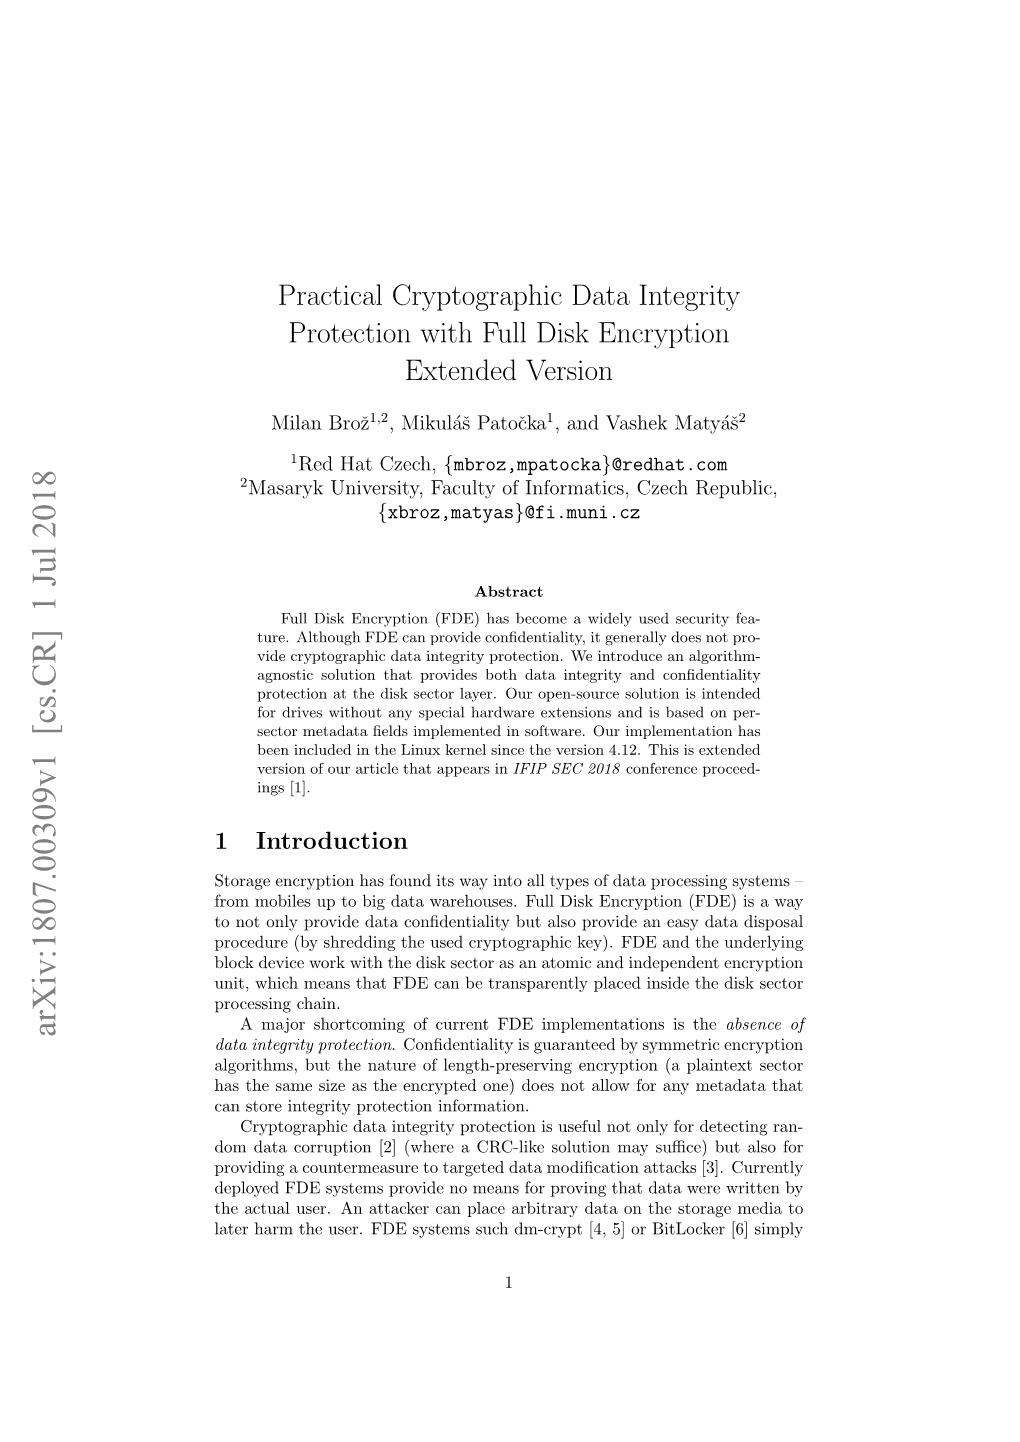 Practical Cryptographic Data Integrity Protection with Full Disk Encryption Extended Version